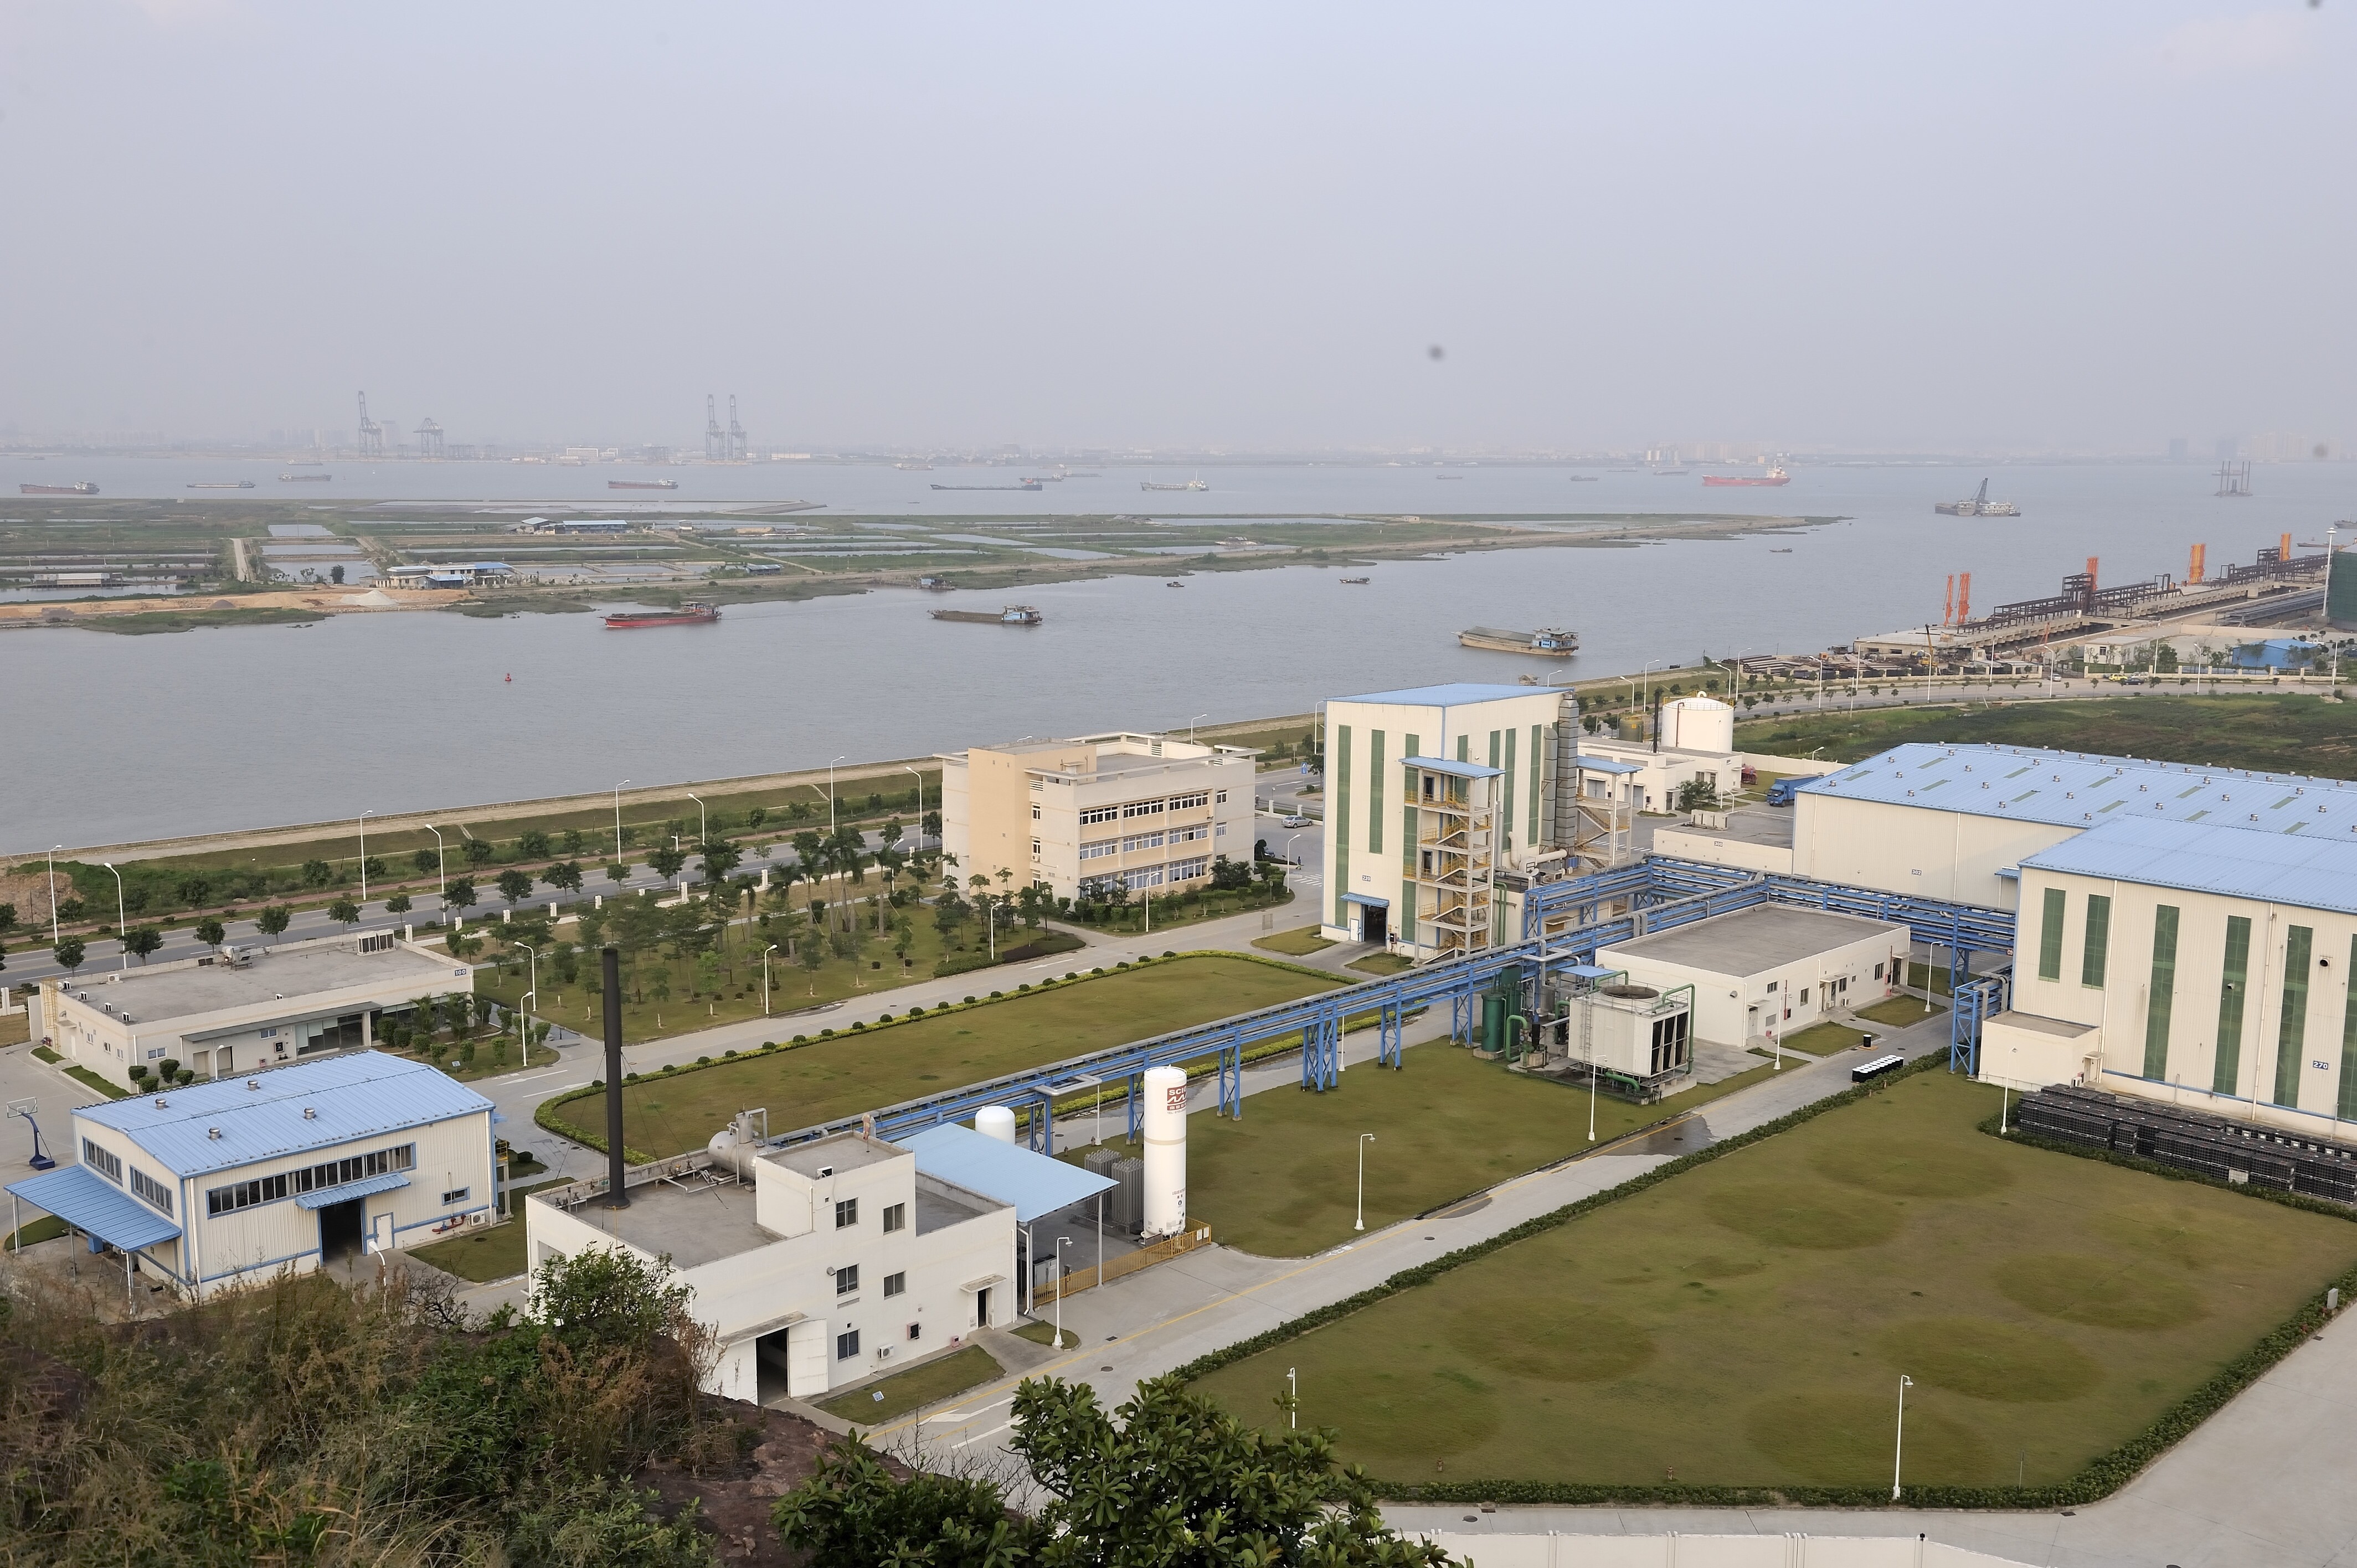 Arkema's Sartomer plant in Guangzhou serves the customer base throughout Asia in this rapidly expanding, high growth market of specialty UV curable inks, coatings and adhesives.